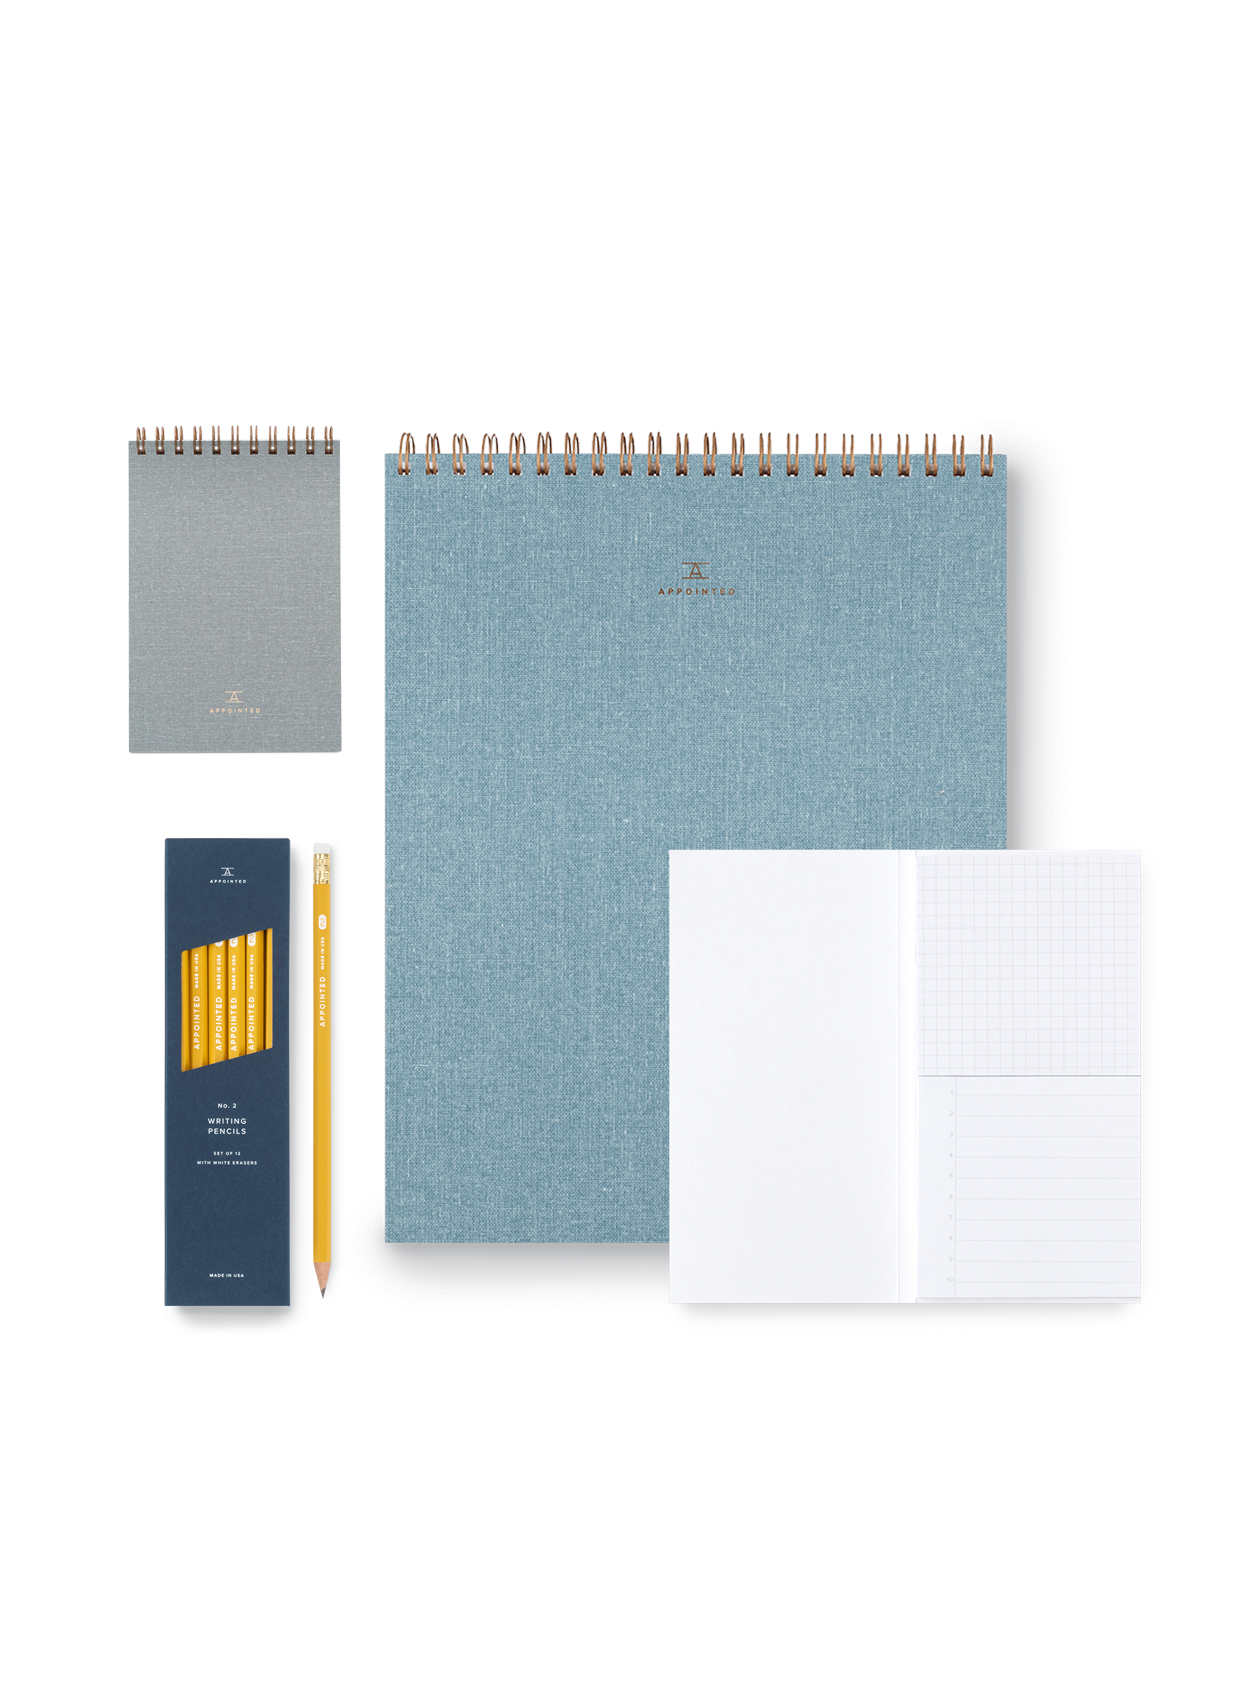 For the Planning Dad Set including a Note Taker & Keeper and other planning accessories